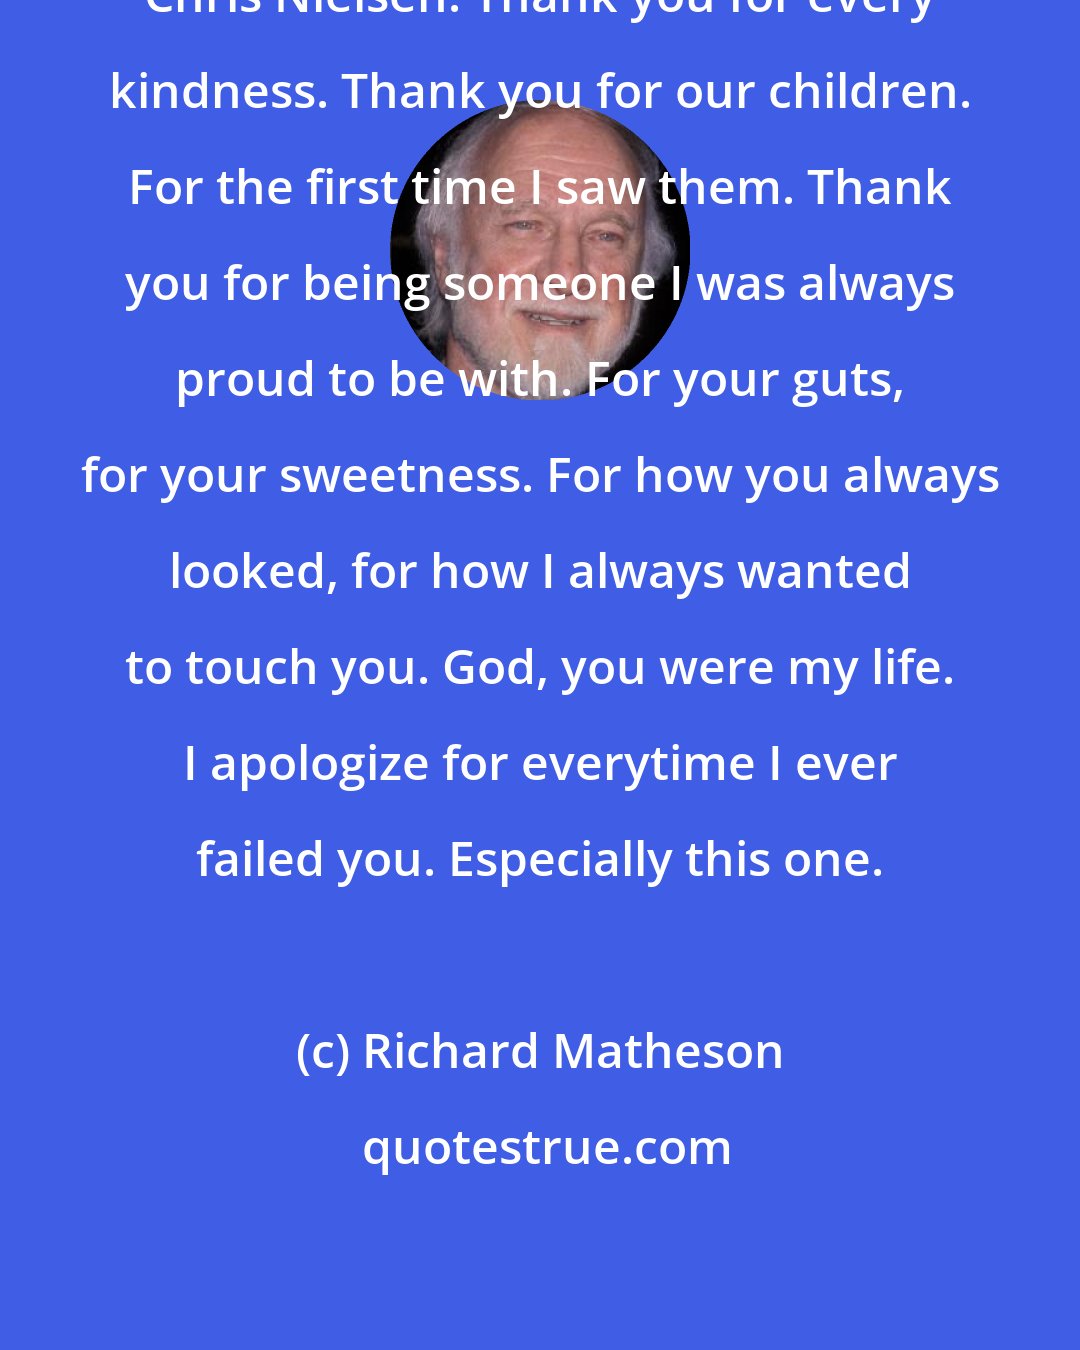 Richard Matheson: Chris Nielsen: Thank you for every kindness. Thank you for our children. For the first time I saw them. Thank you for being someone I was always proud to be with. For your guts, for your sweetness. For how you always looked, for how I always wanted to touch you. God, you were my life. I apologize for everytime I ever failed you. Especially this one.